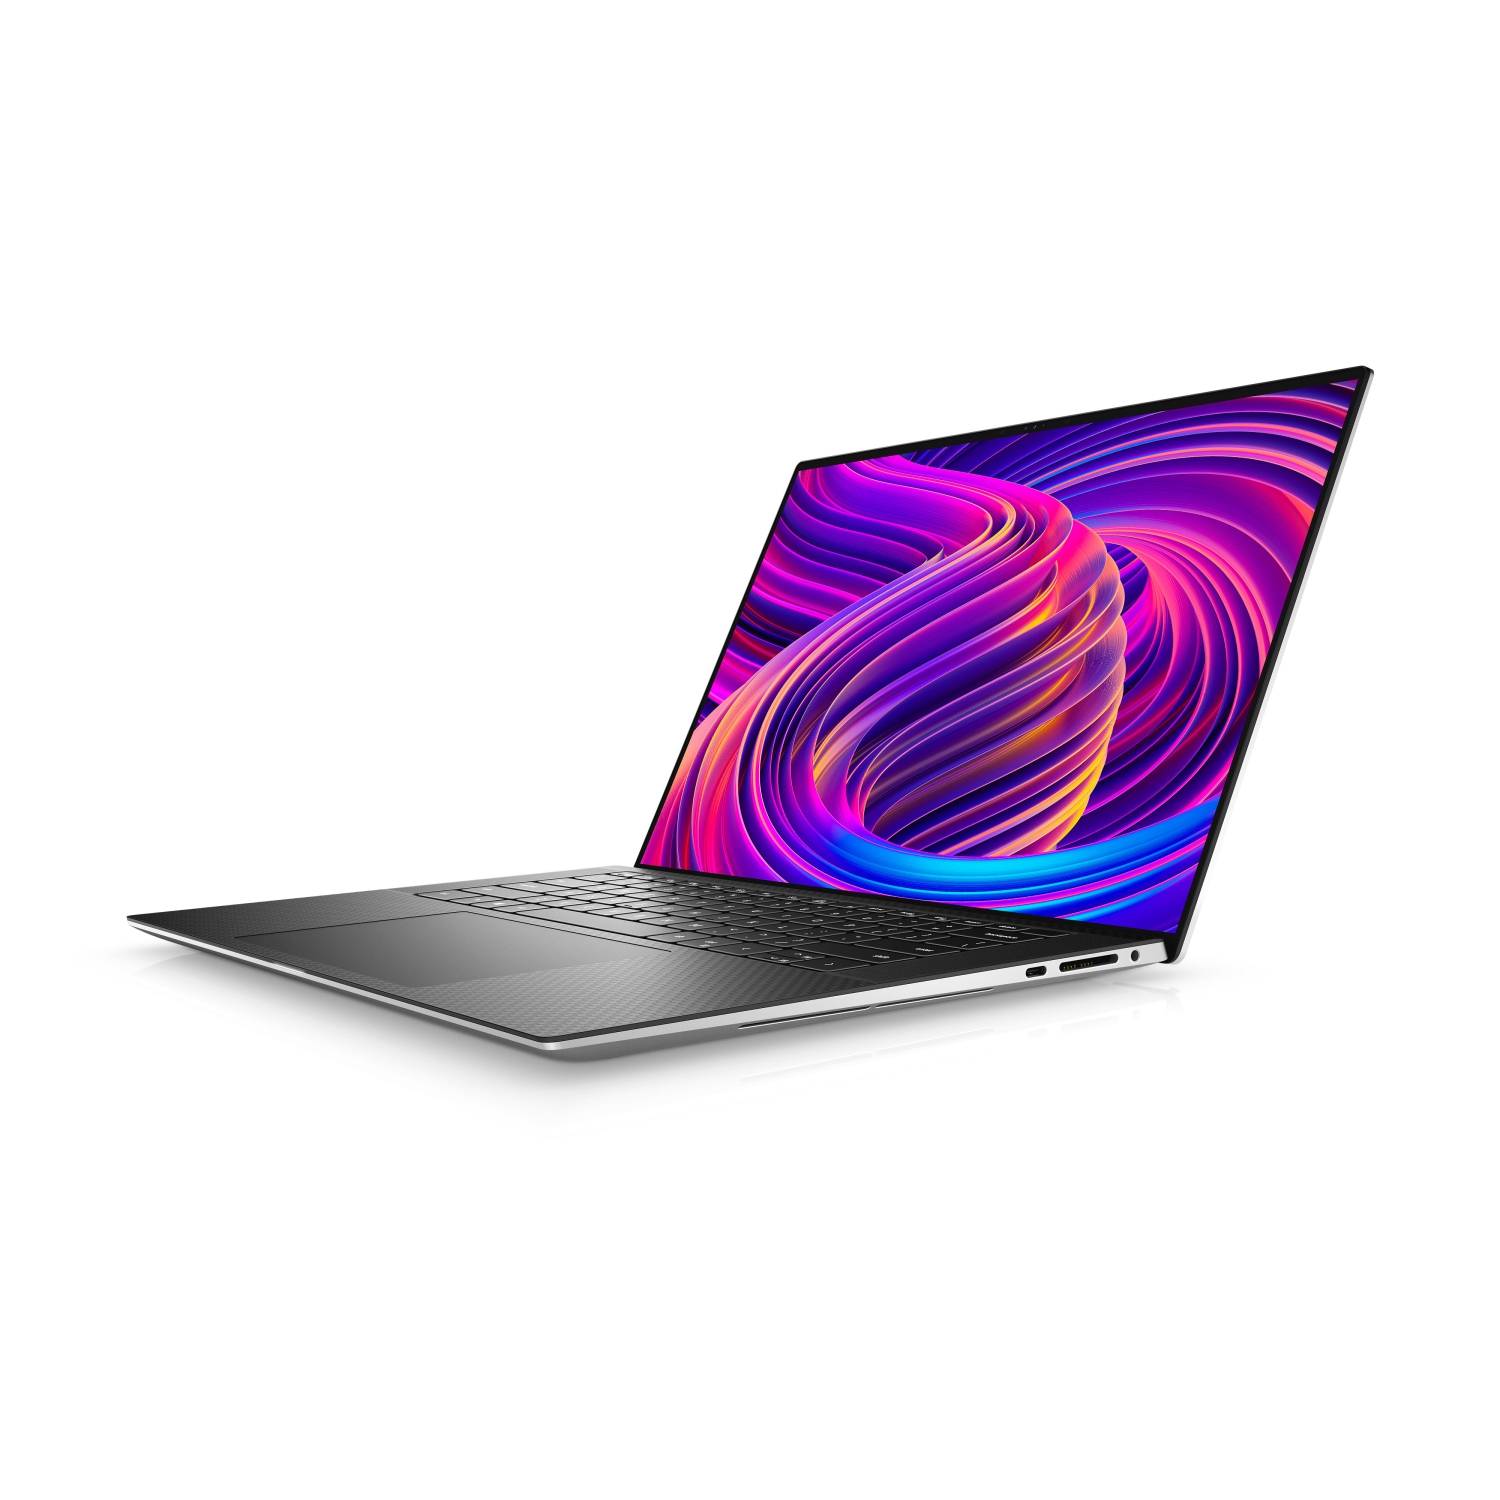 Refurbished (Excellent) - Dell XPS 15 9510 Laptop (2021), 15.6" 4K Touch, Core i7, 512GB SSD, 16GB RAM, RTX 3050, 8 Cores @ 4.6 GHz, 11th Gen CPU Certified Refurbished